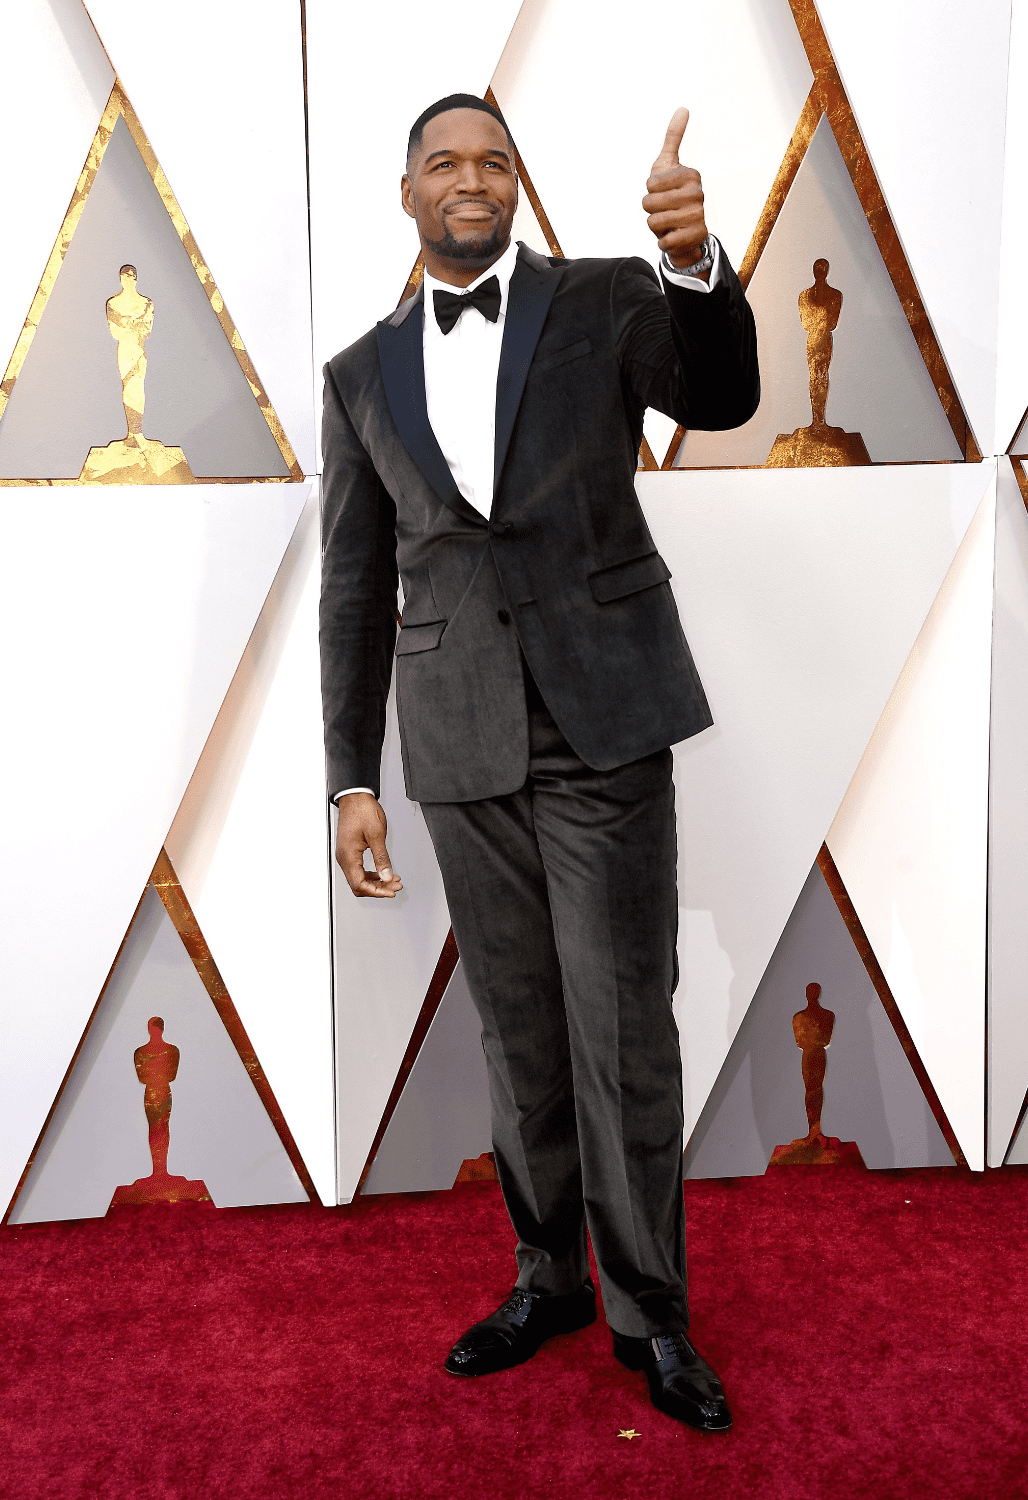 Michael Strahan attends the 90th Annual Academy Awards on March 4, 2018 in Hollywood, California. | Source: Getty Images